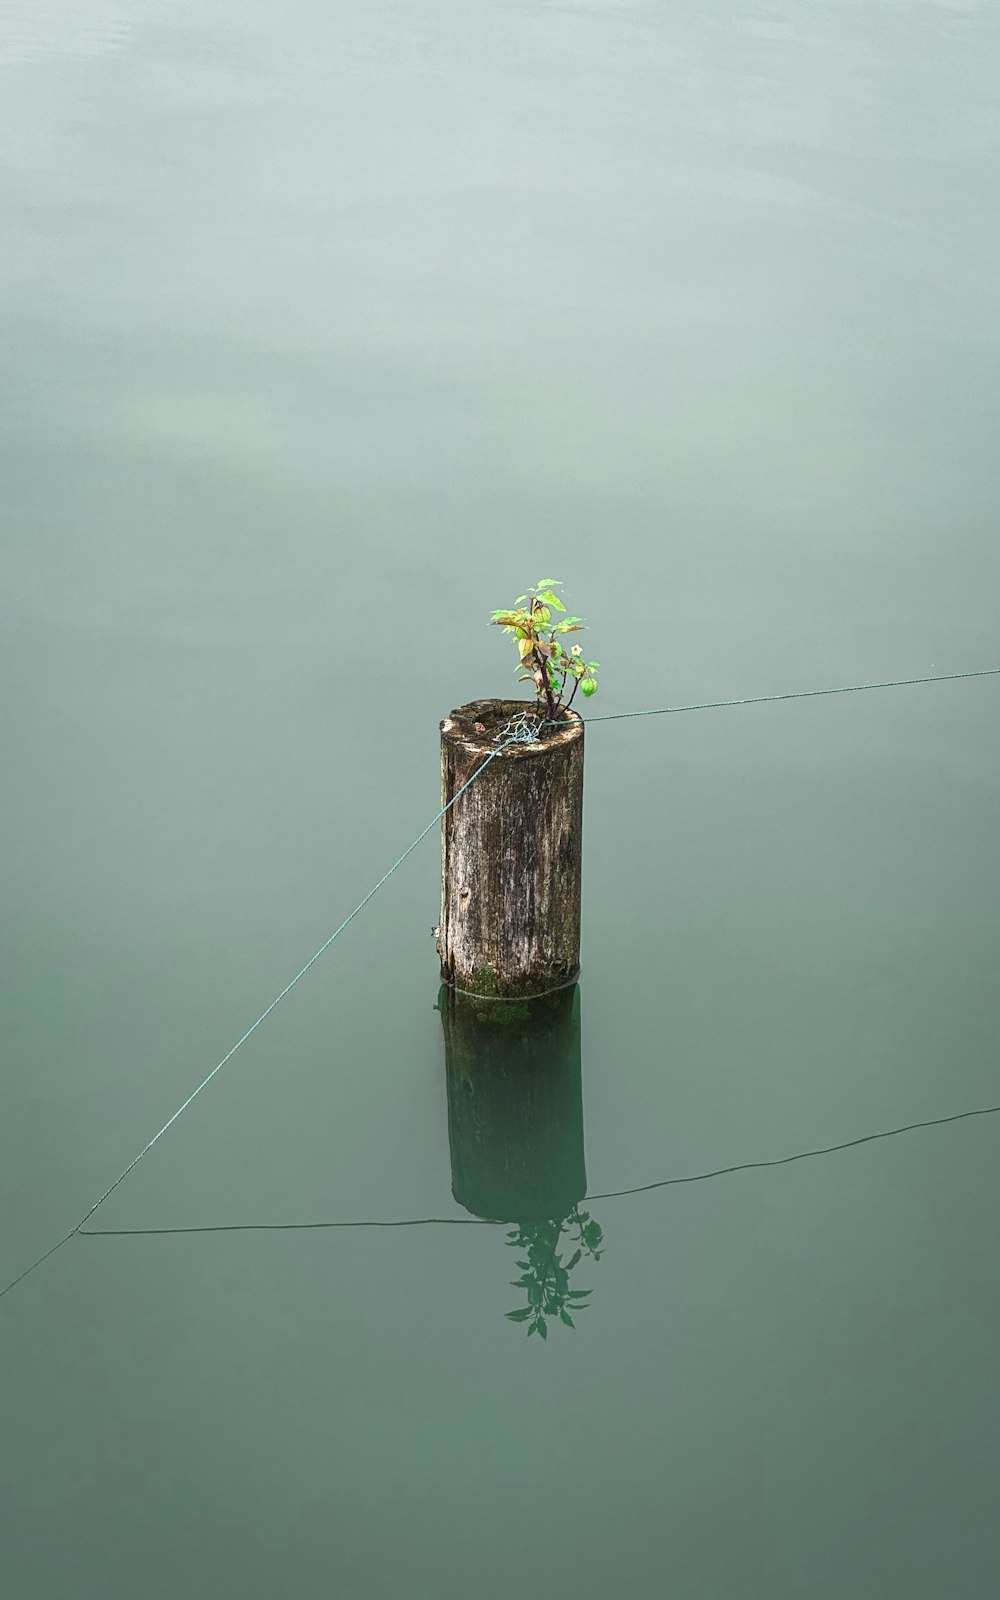 a tree stump in the middle of a body of water